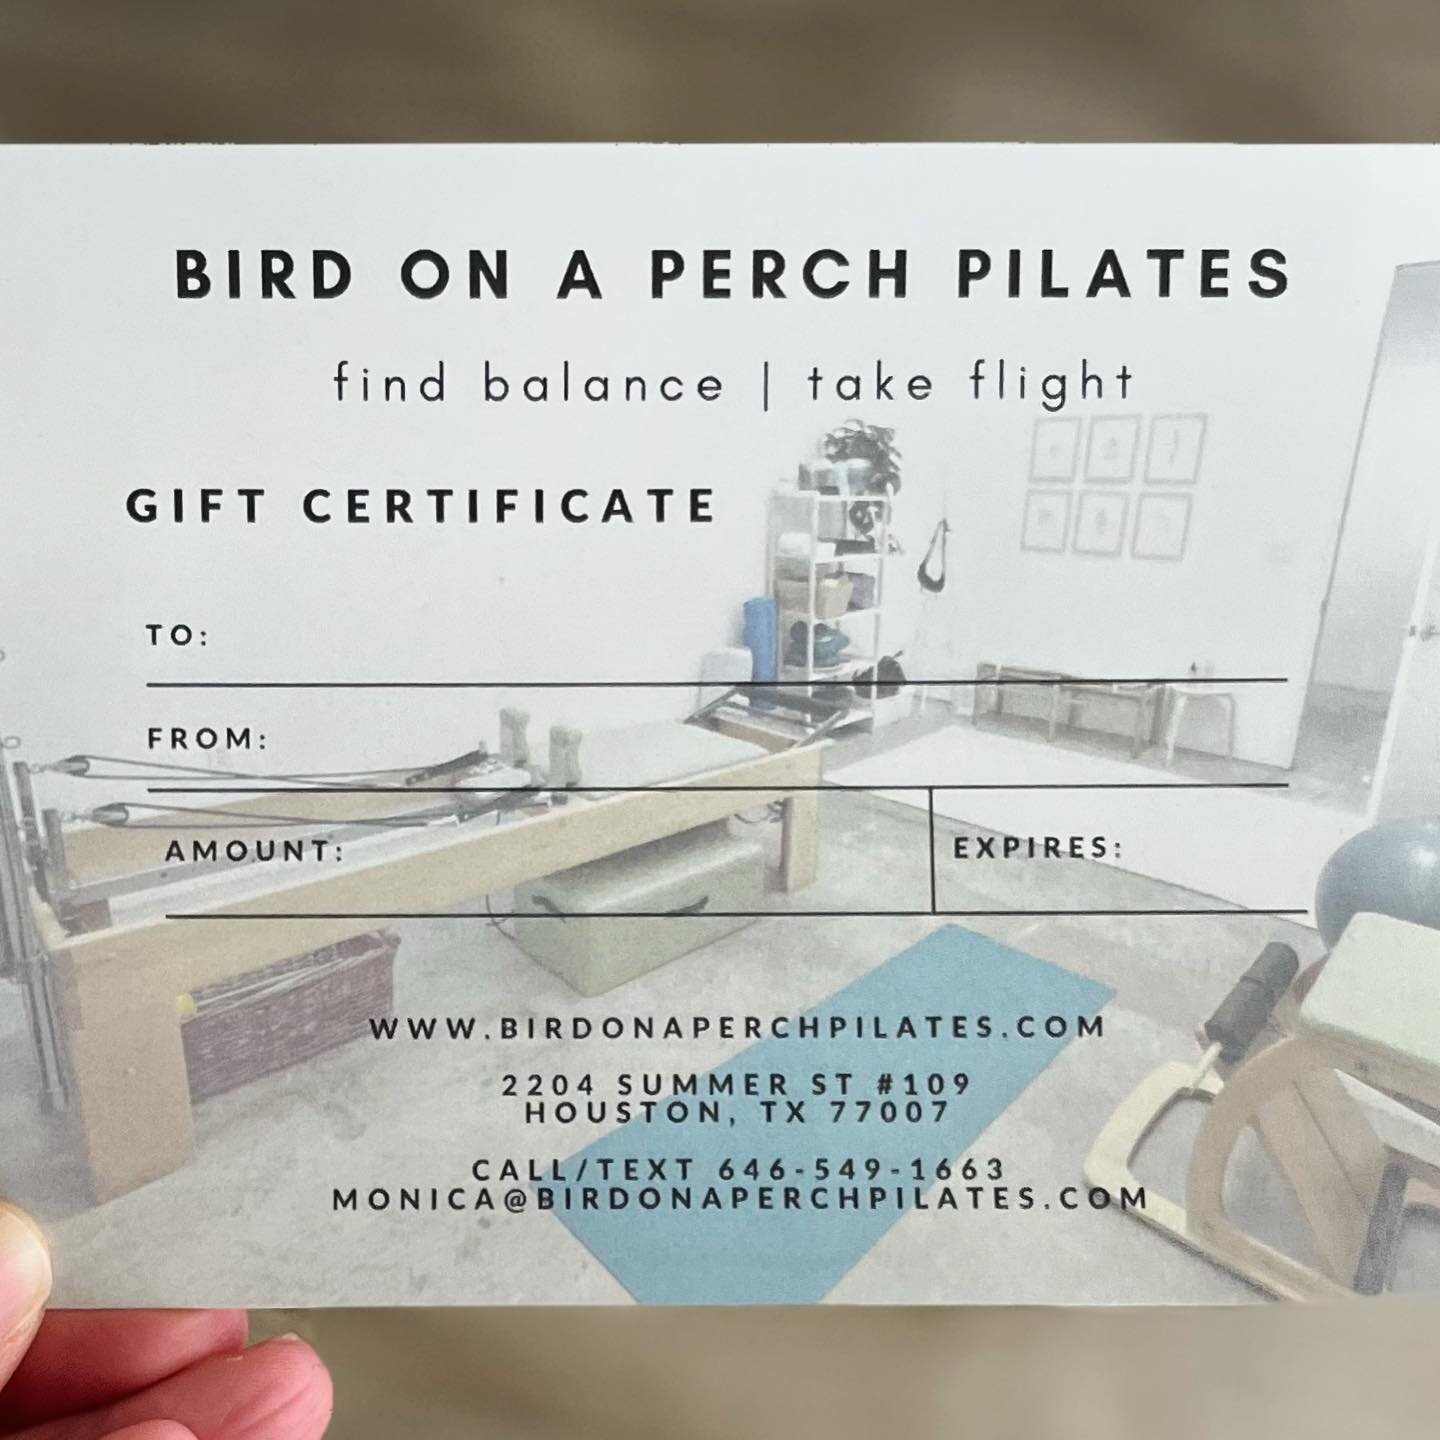 Looking for a unique gift this holiday season? Give the gift of movement that alleviates aches and pains, builds strength &amp; confidence, and enhances performance to your friends, loved ones or the dancer in your life.  Gift Certificates for Privat